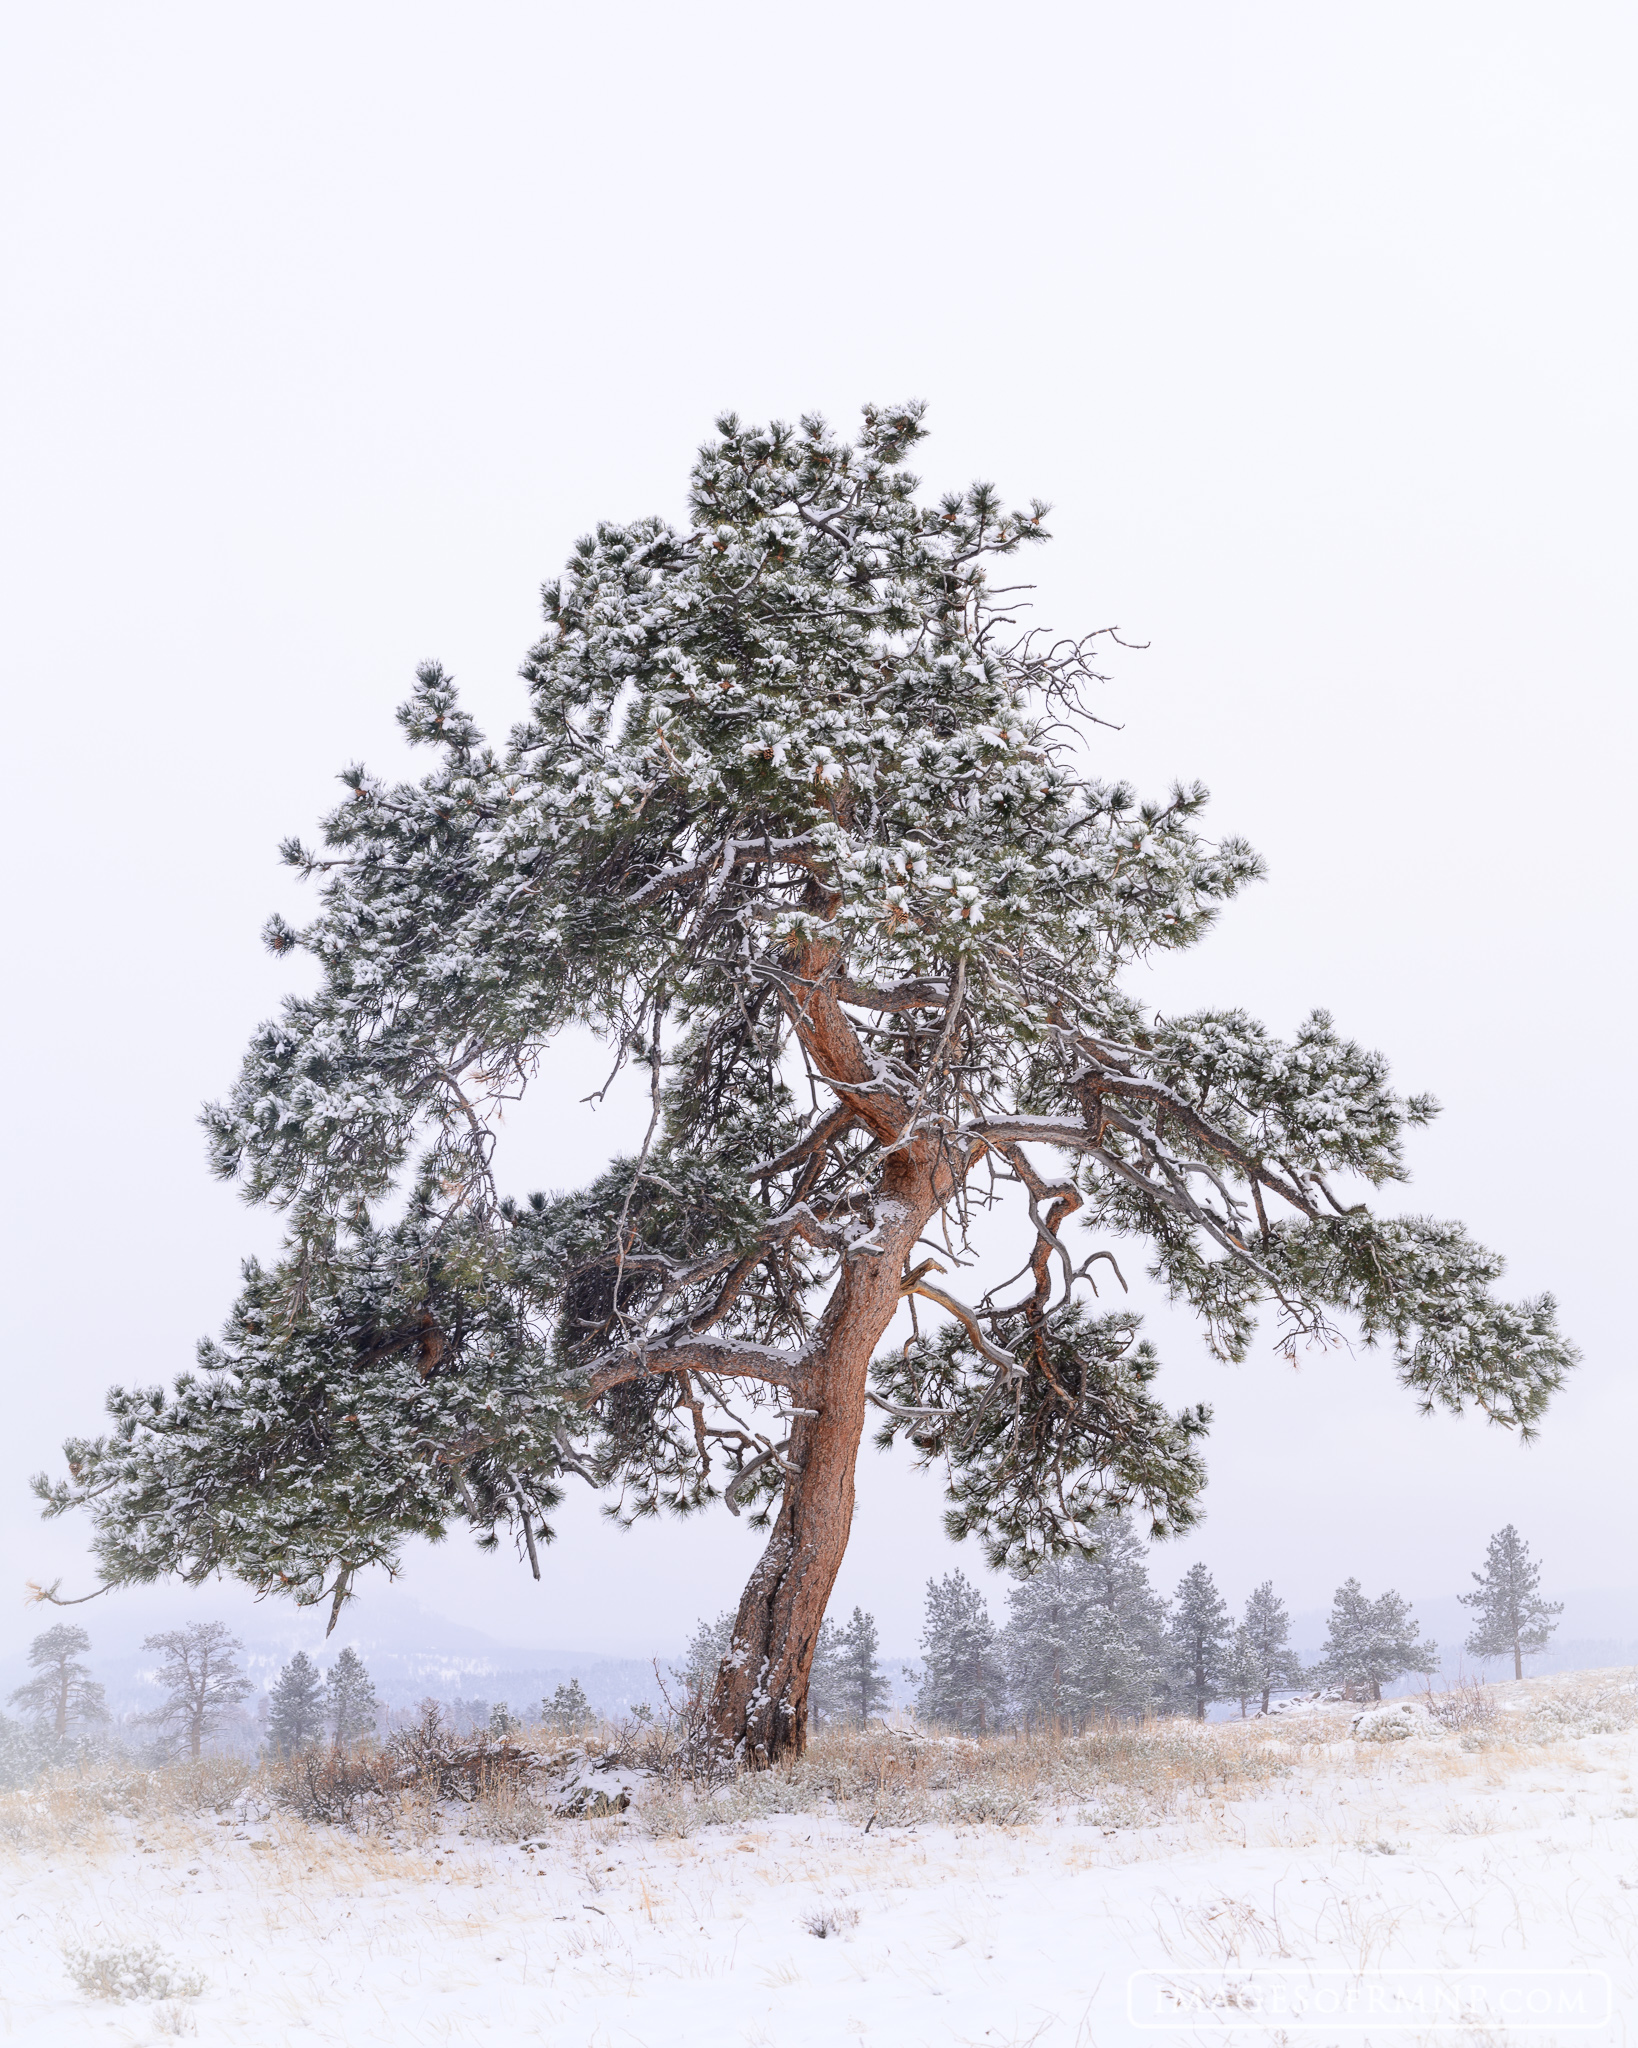 I live in a ponderosa forest and I had my eye on this tree for a while, waiting for the right conditions to photograph it. I...